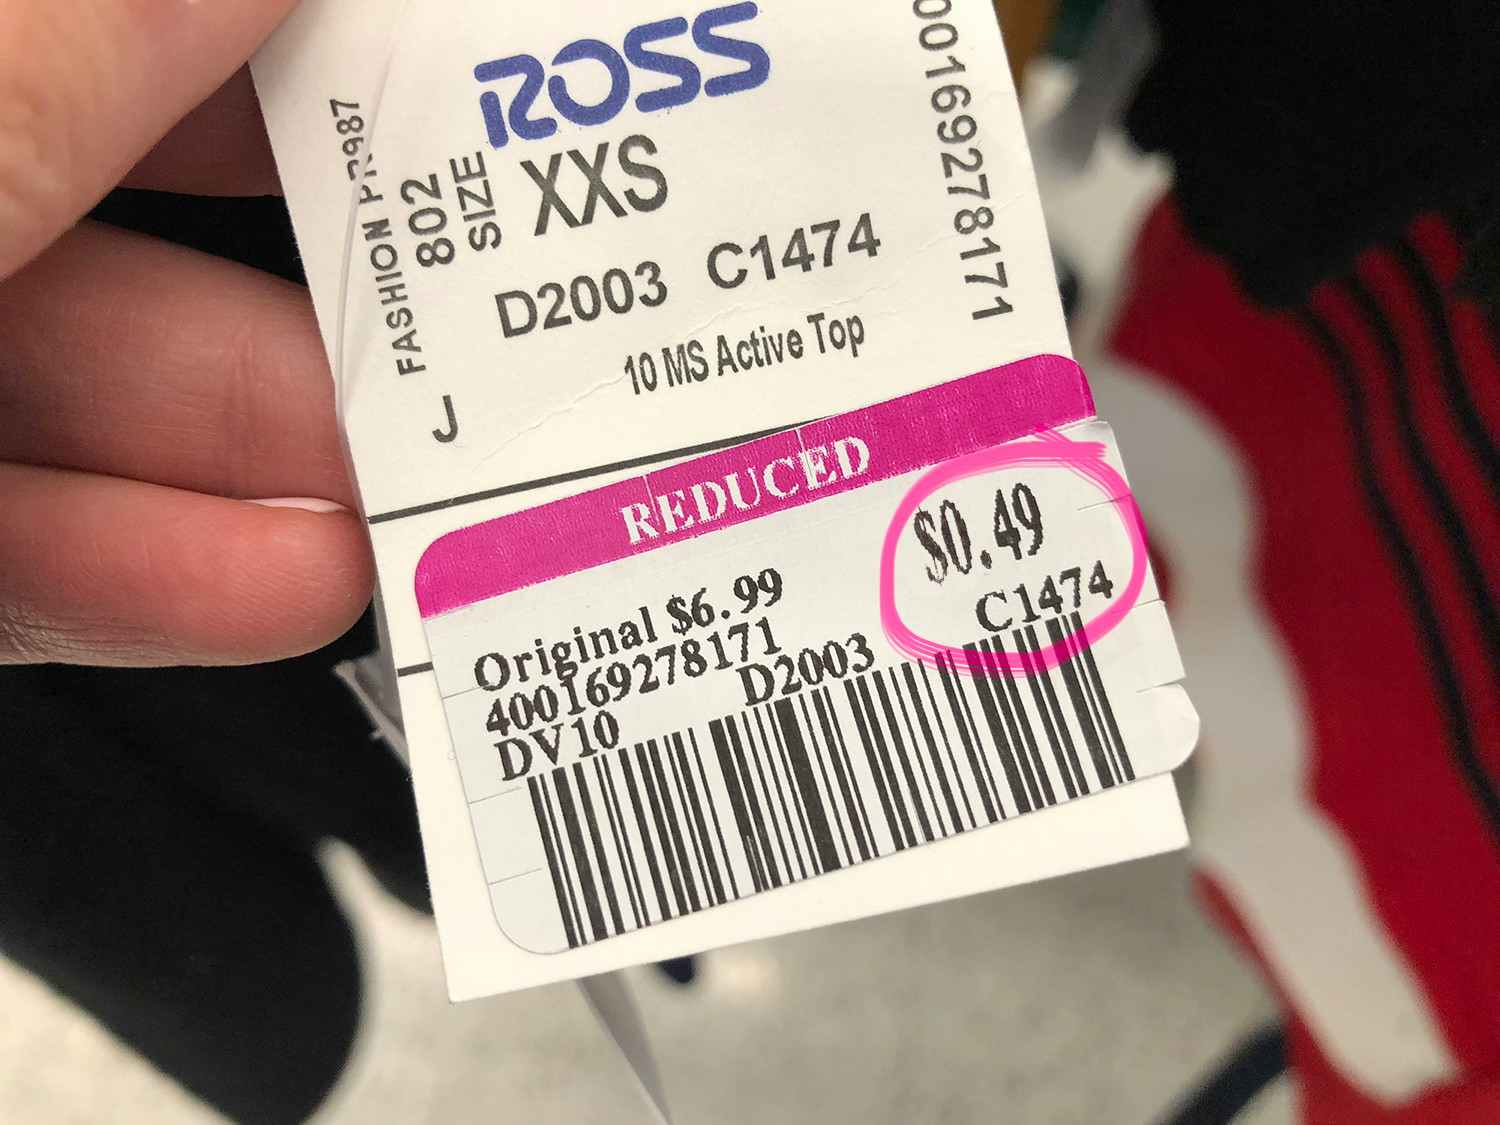 Ross clearance price tag with a pink circle around the final price reading $0.49